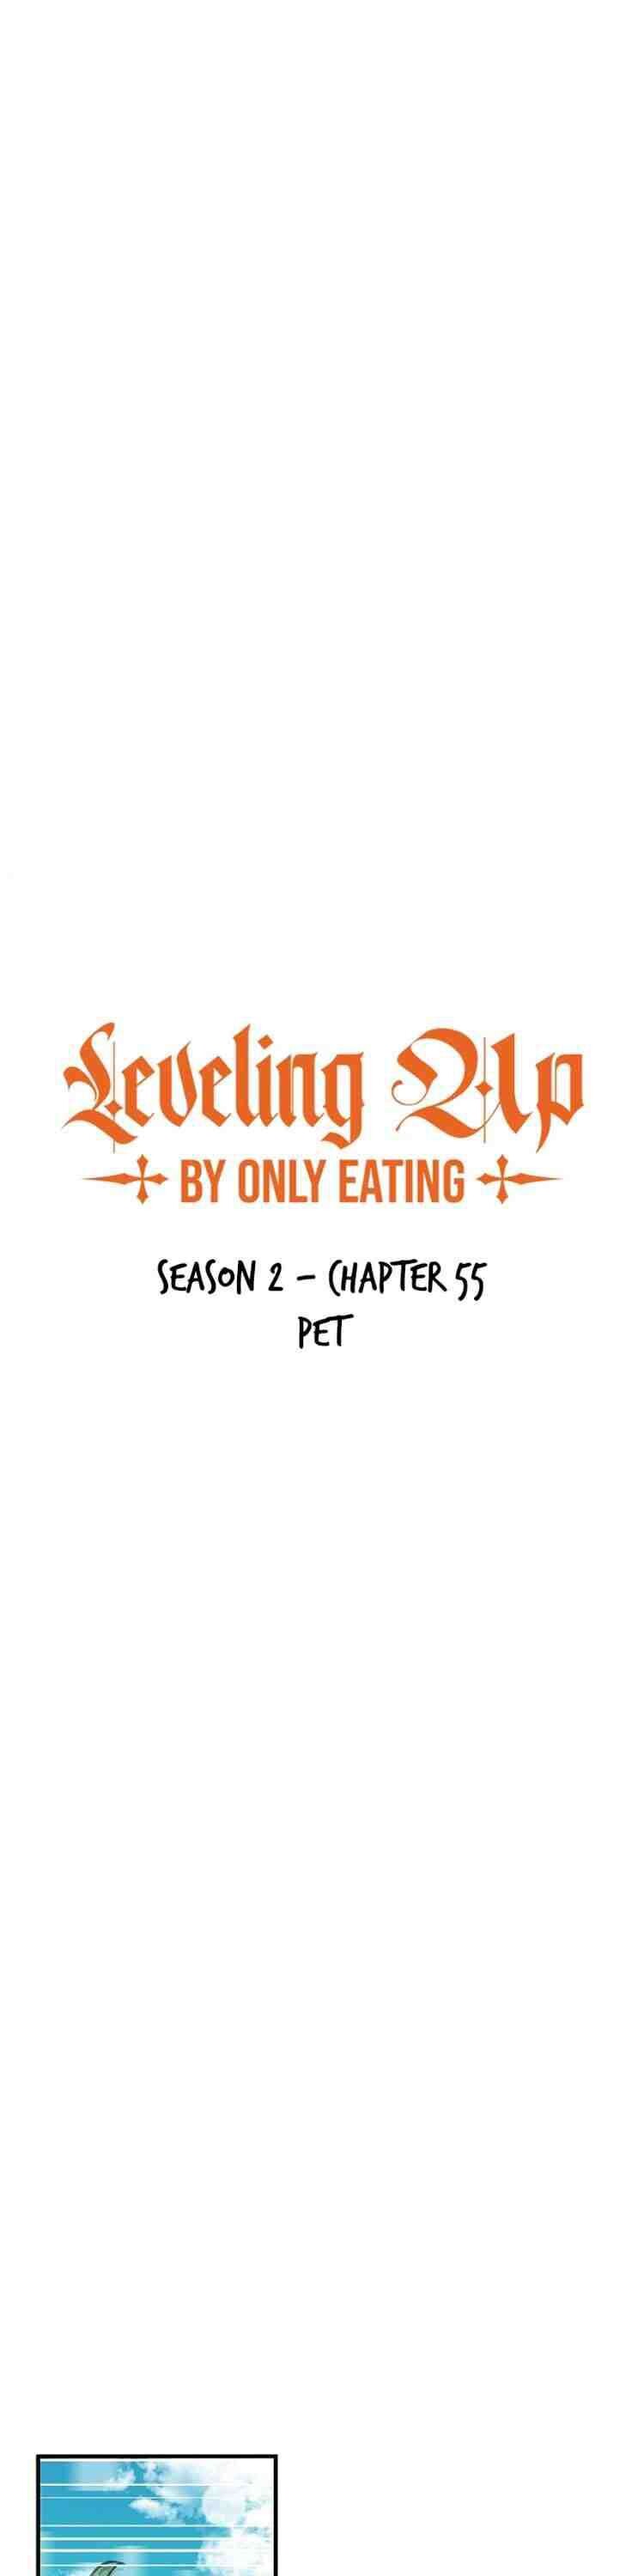 Leveling Up, By Only Eating! 55 18